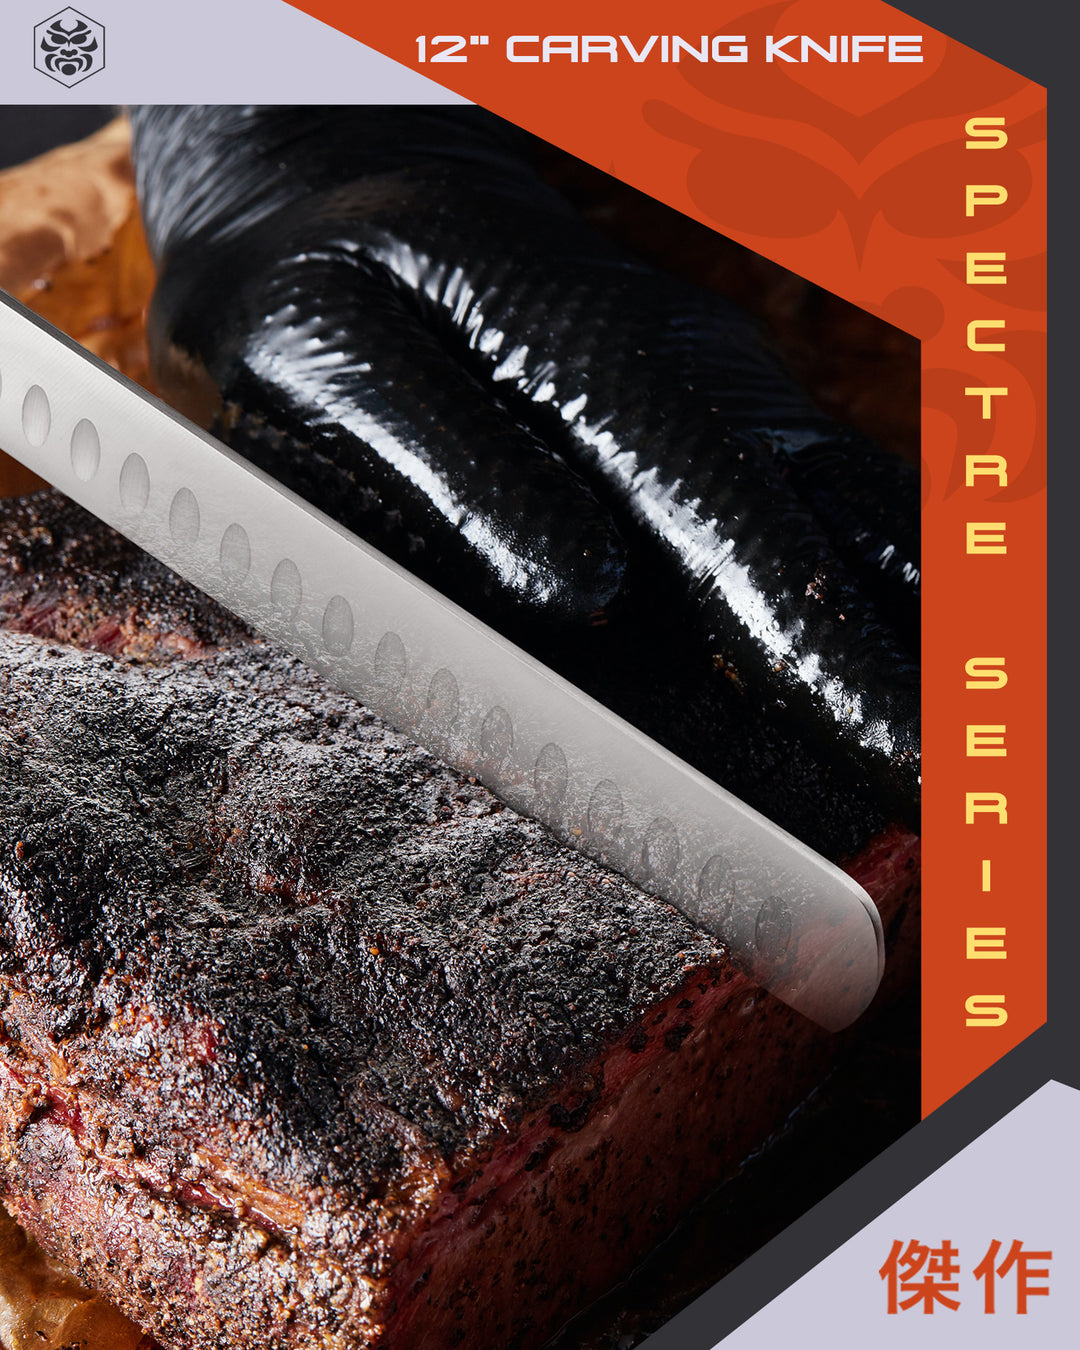 A pitmaster using the Spectre Carving Knife to slice through a brisket.